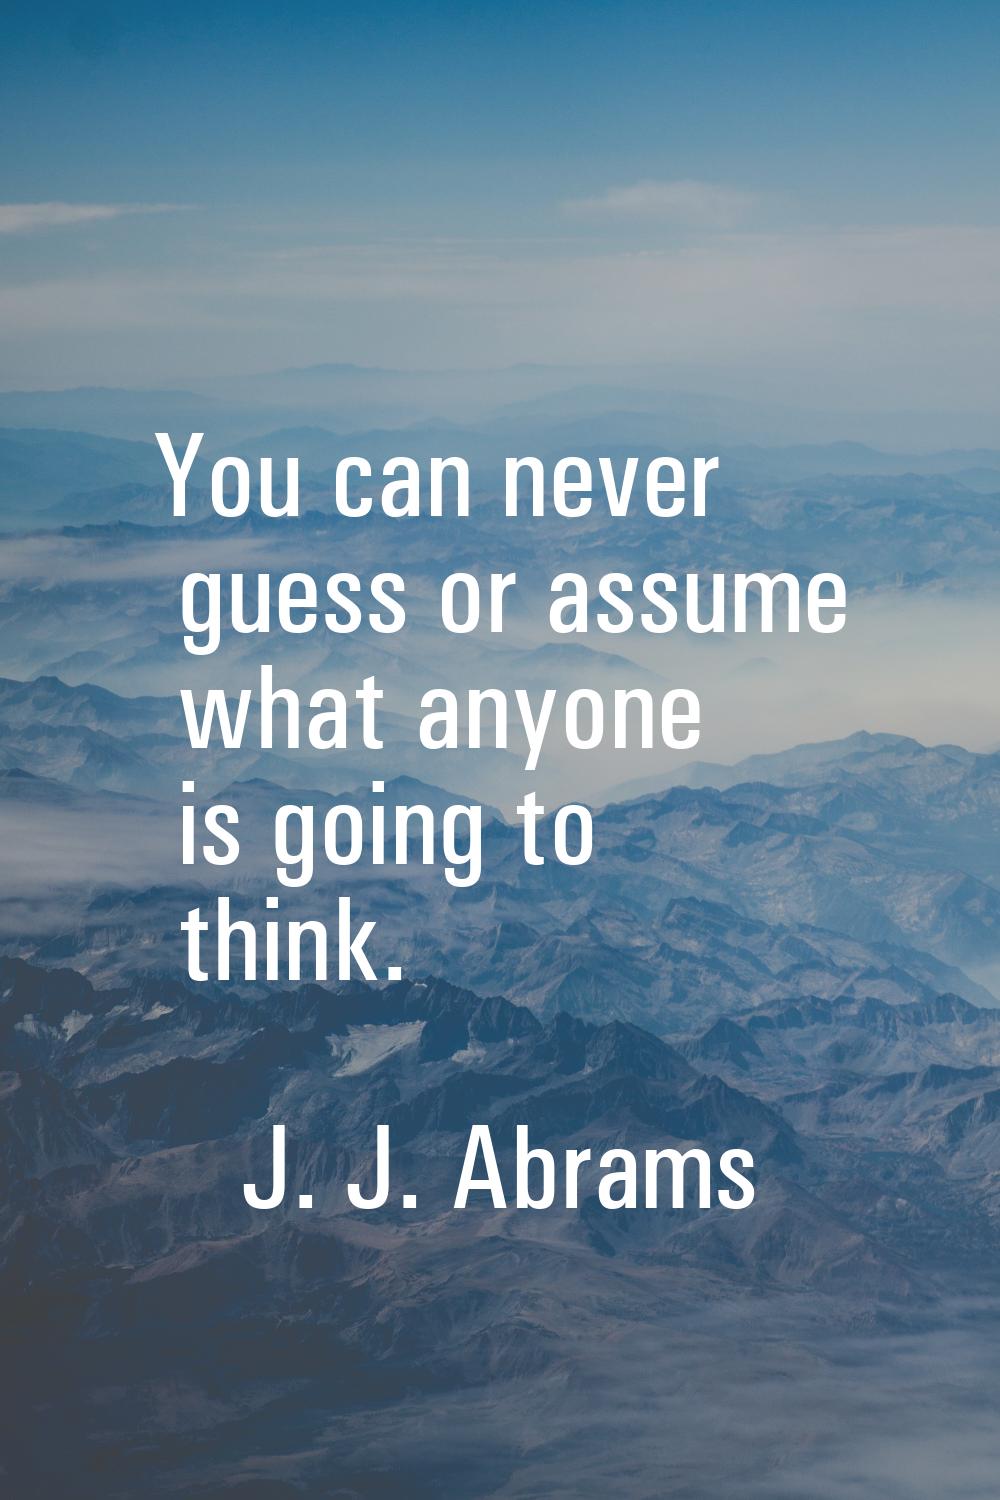 You can never guess or assume what anyone is going to think.